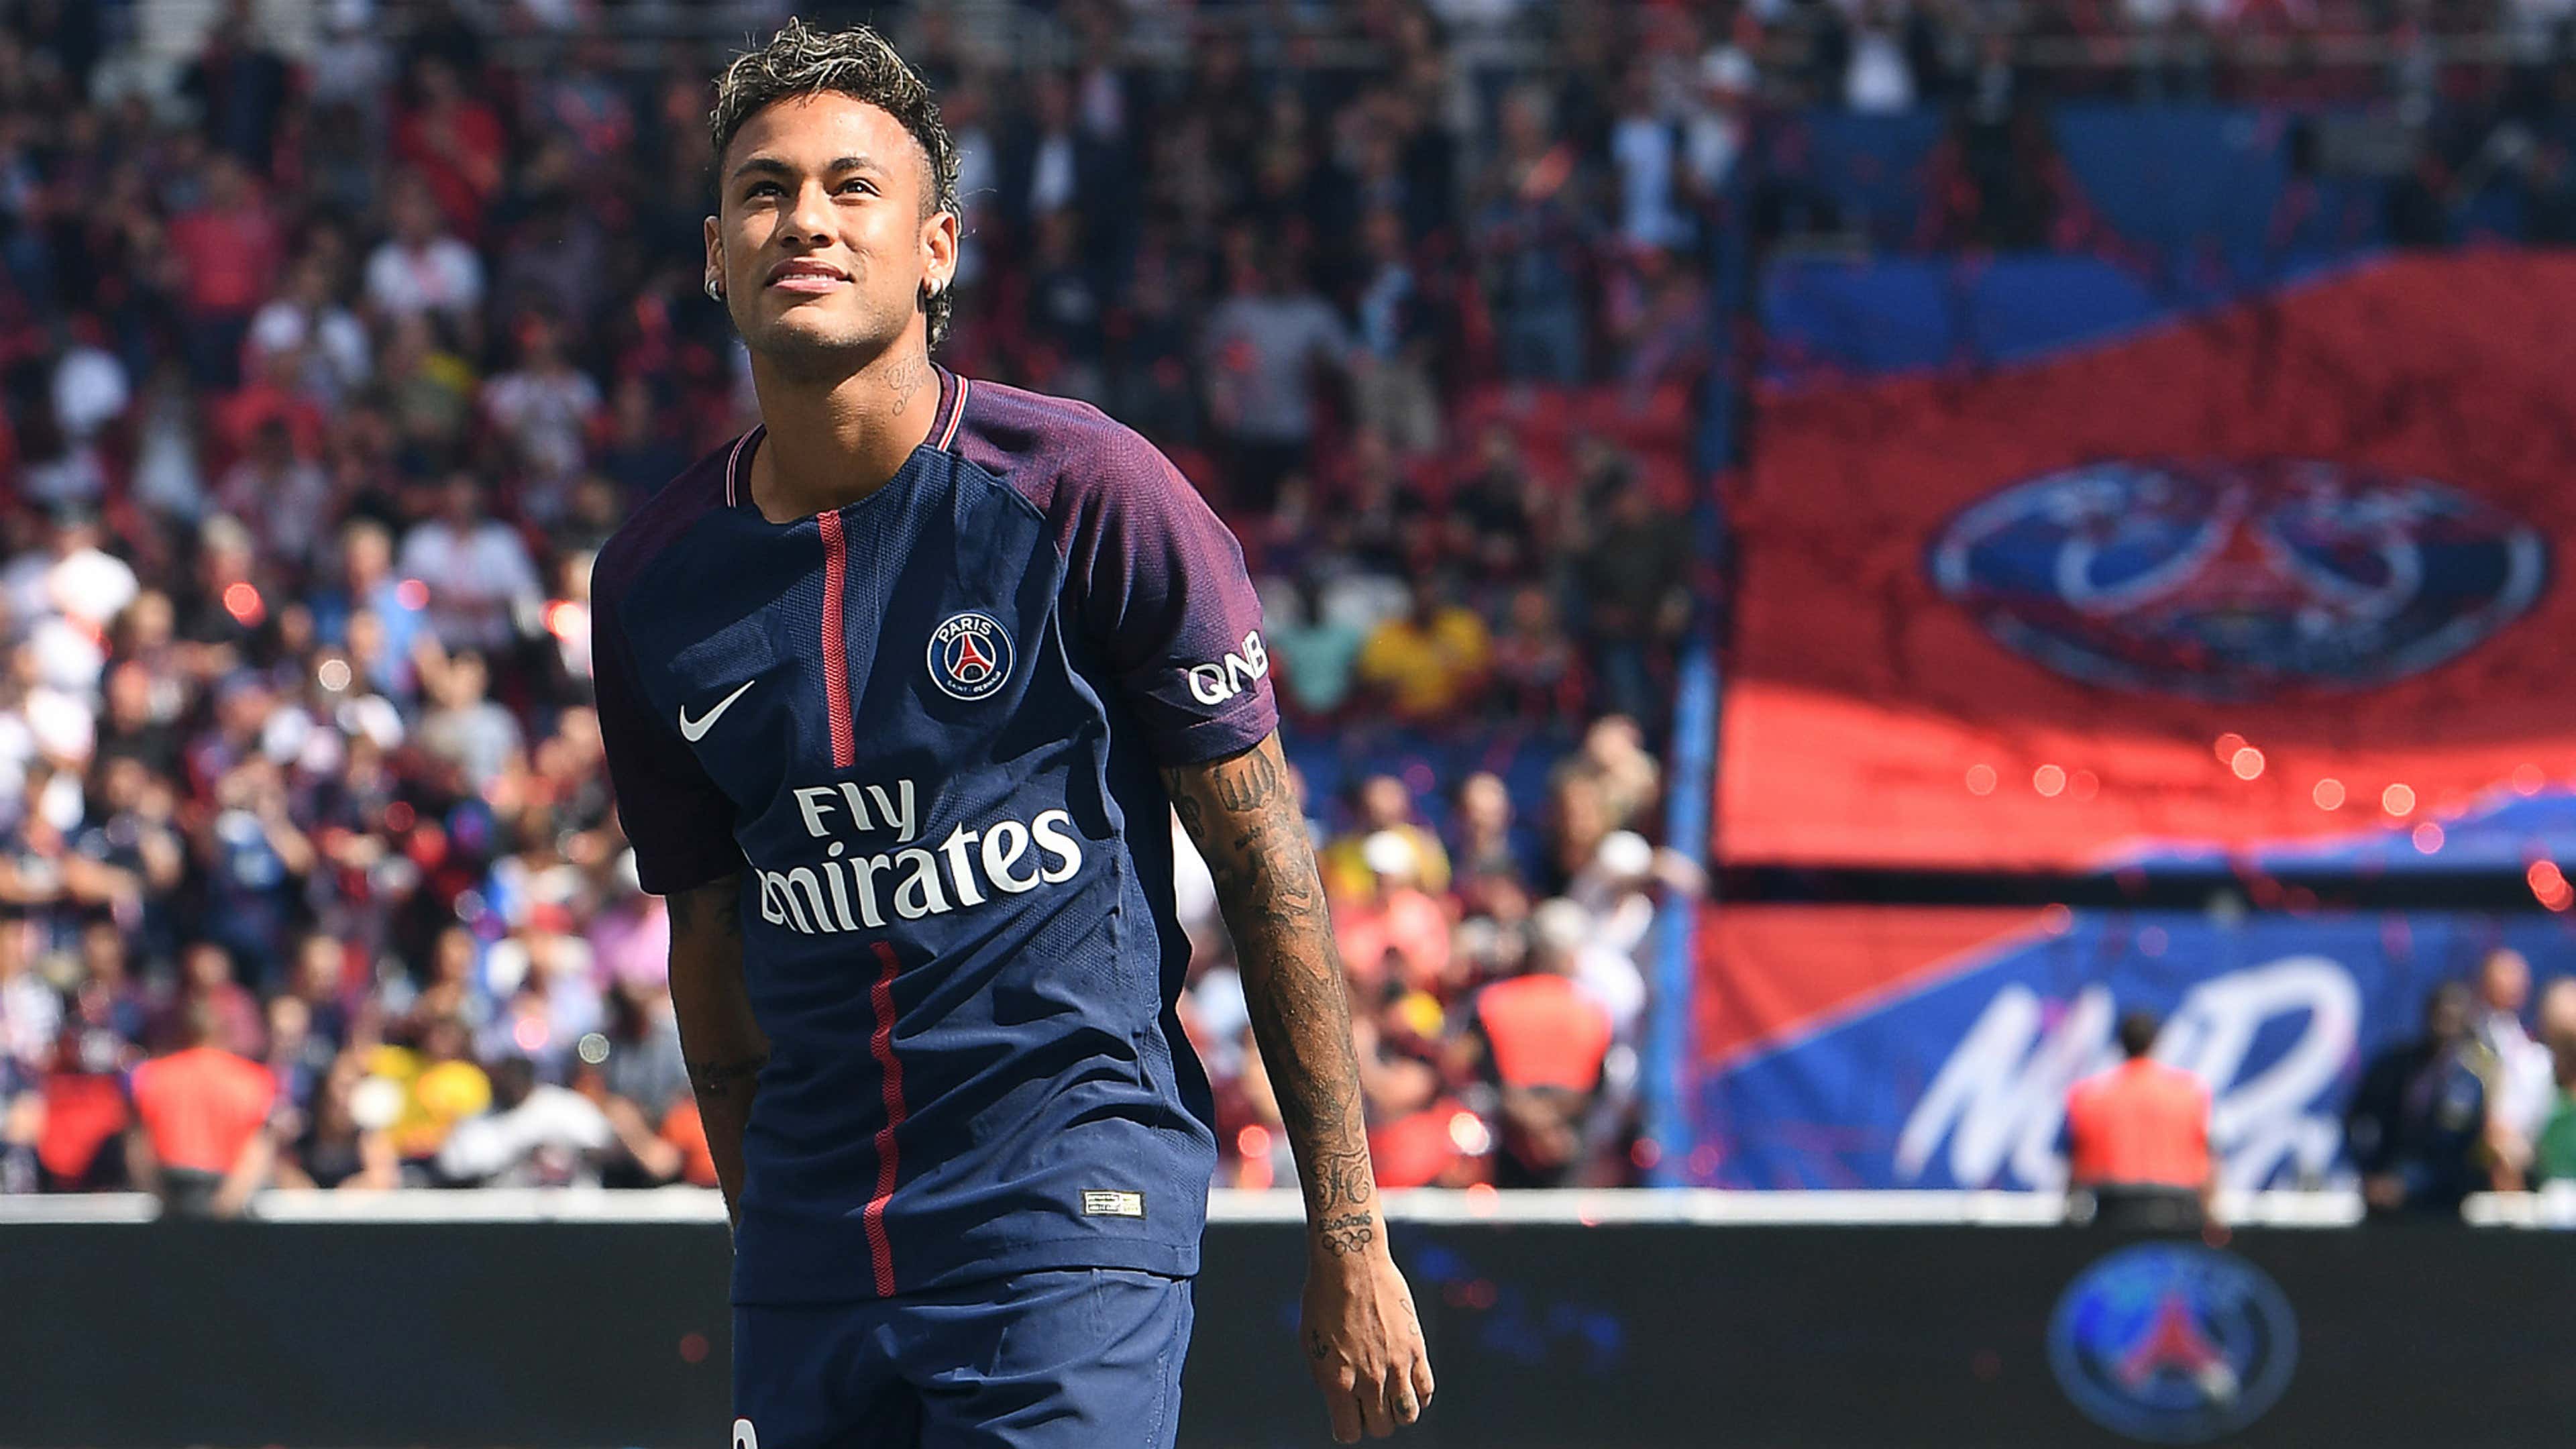 Ligue 1: Neymar proves to be PSG's man to watch - even in the